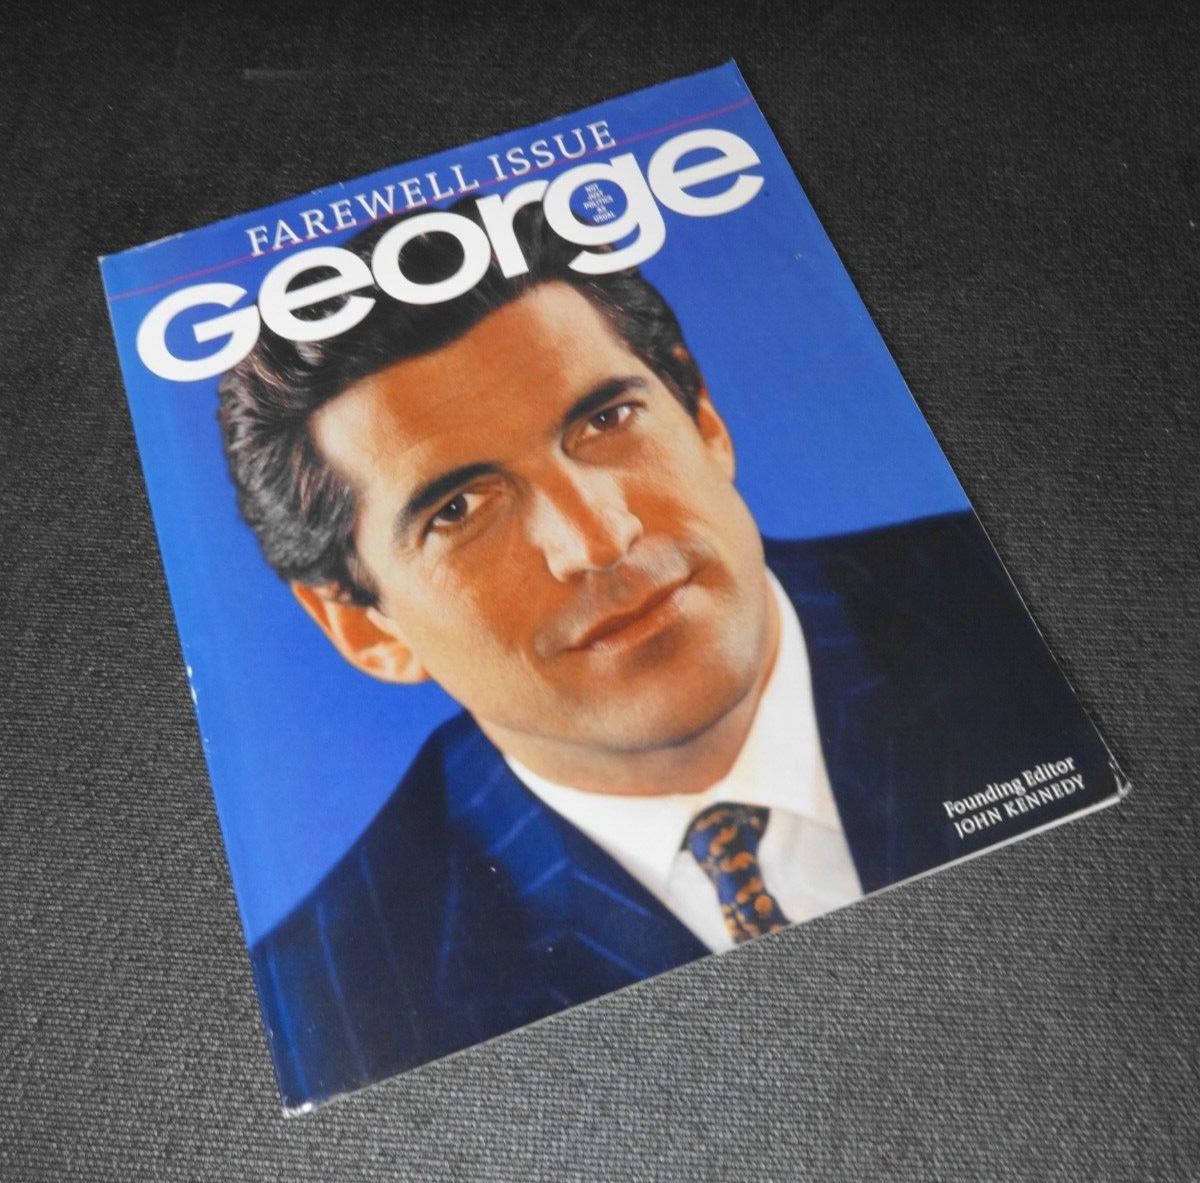 George Magazine, Farewell Issue, May 31, 2001